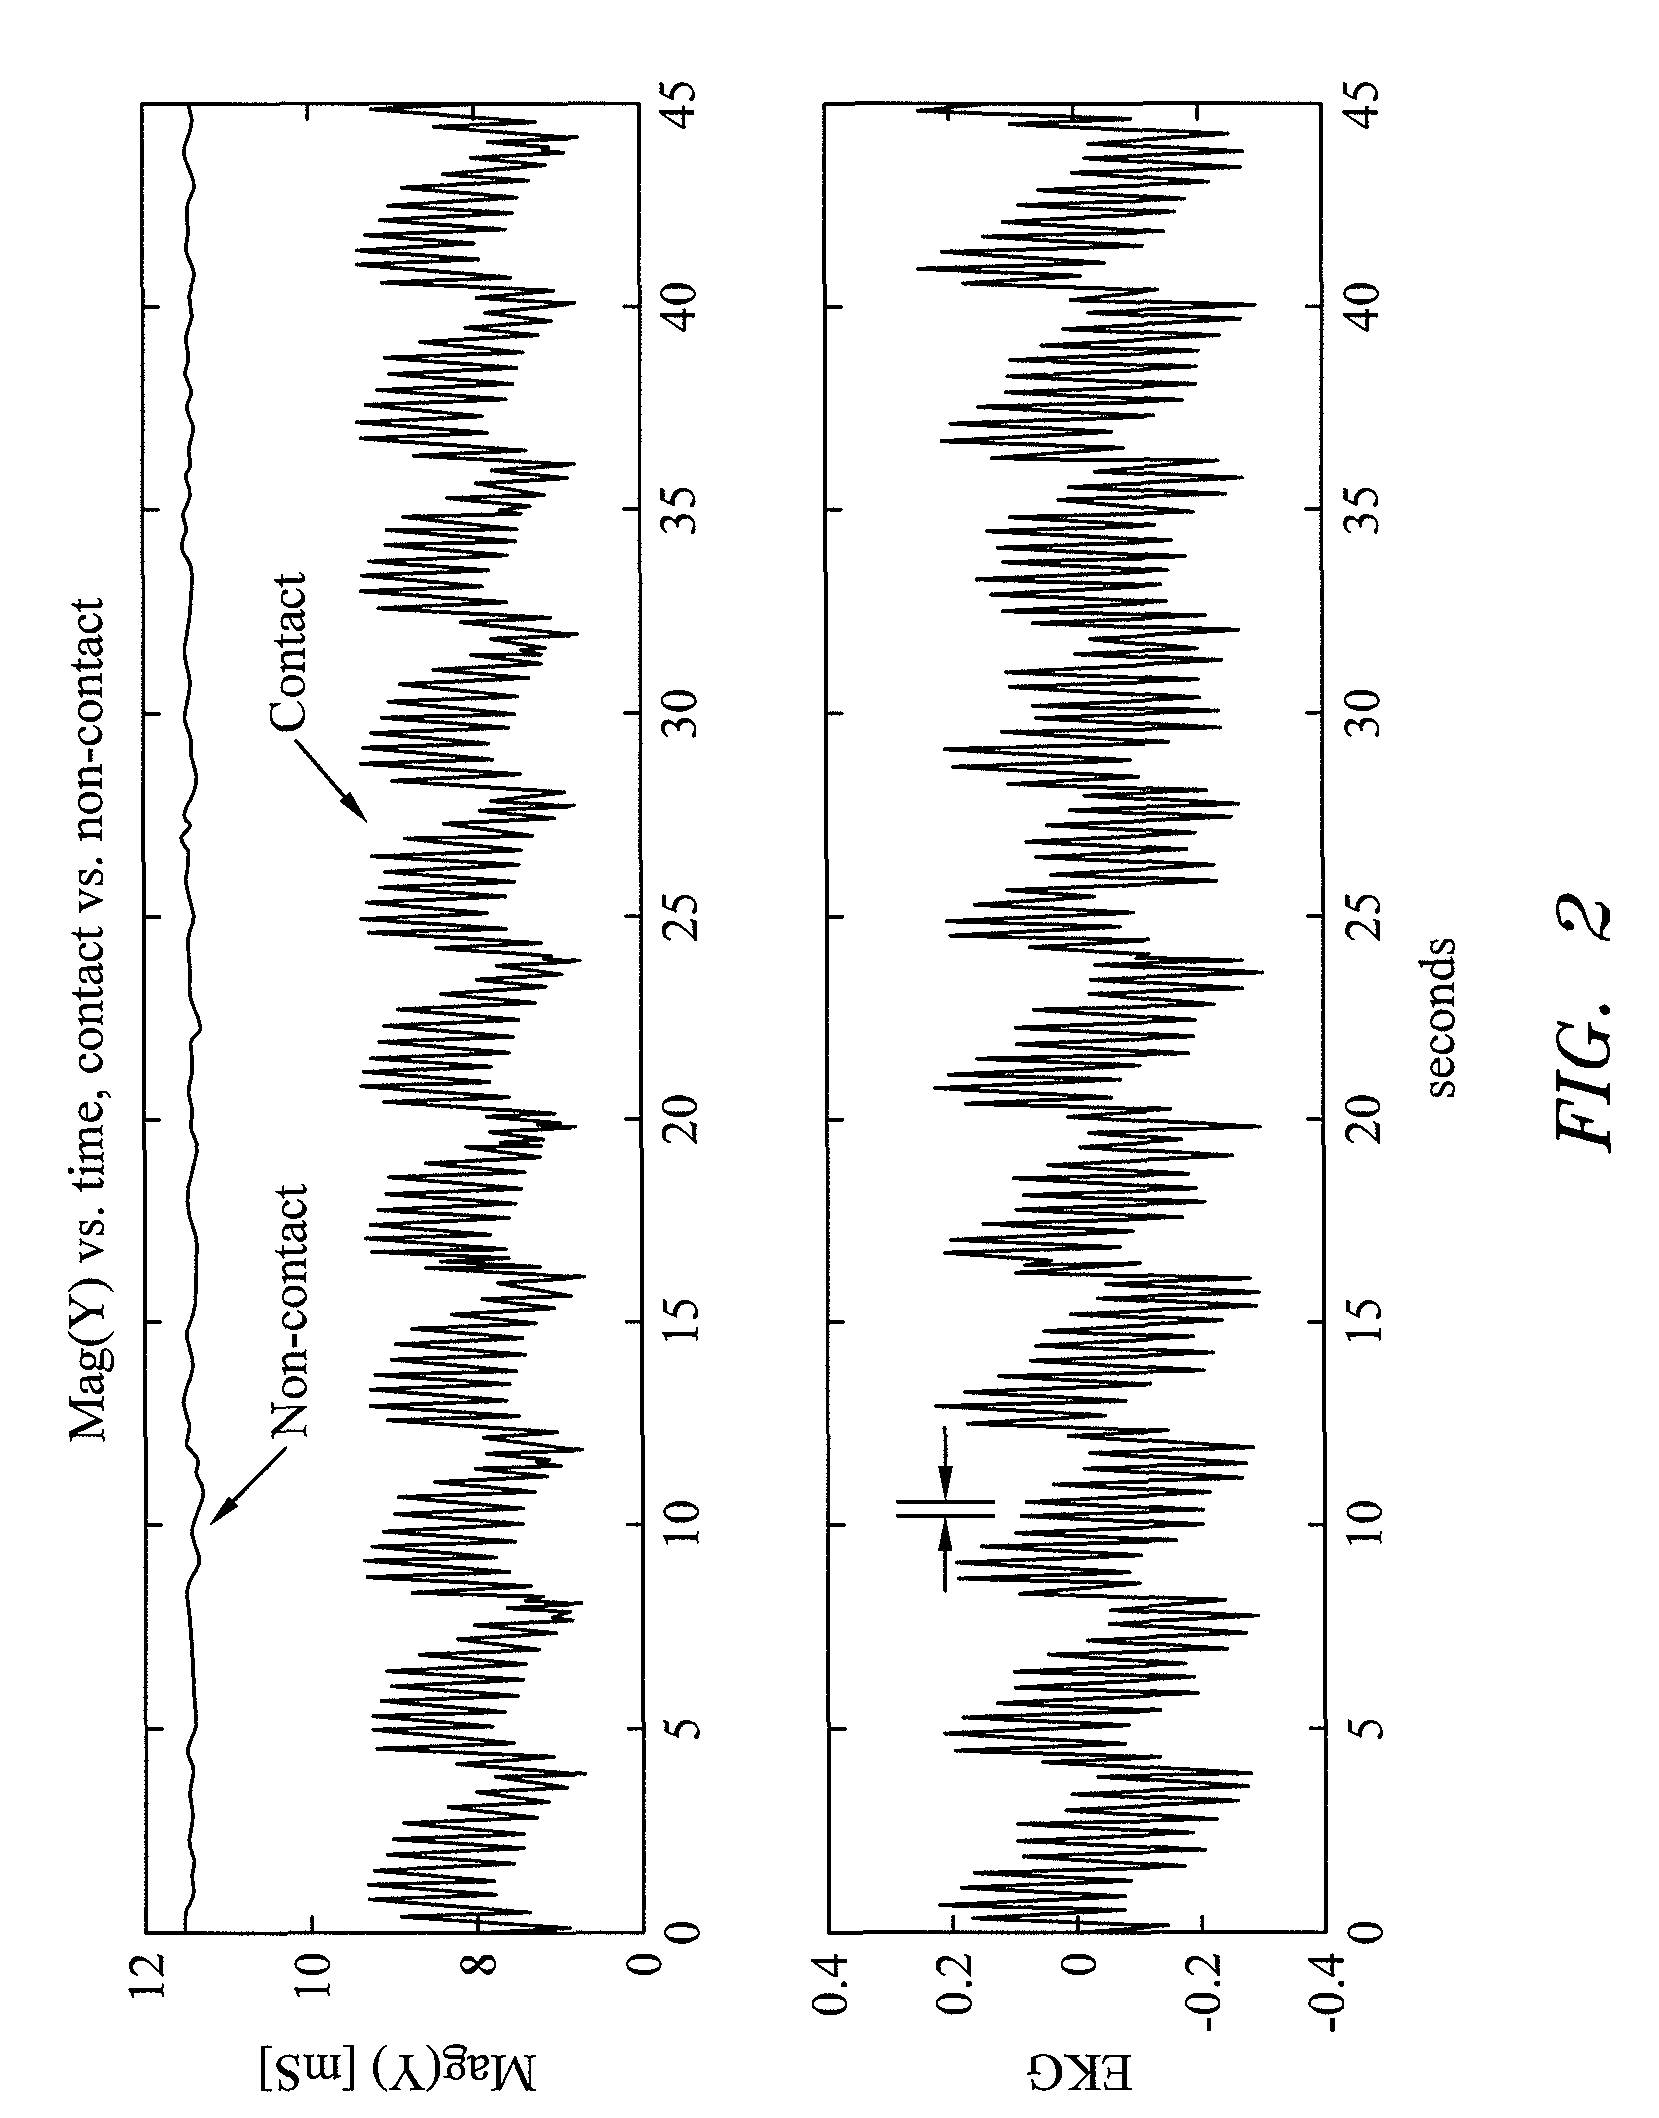 System and method for determining electrode-tissue contact based on amplitude modulation of sensed signal